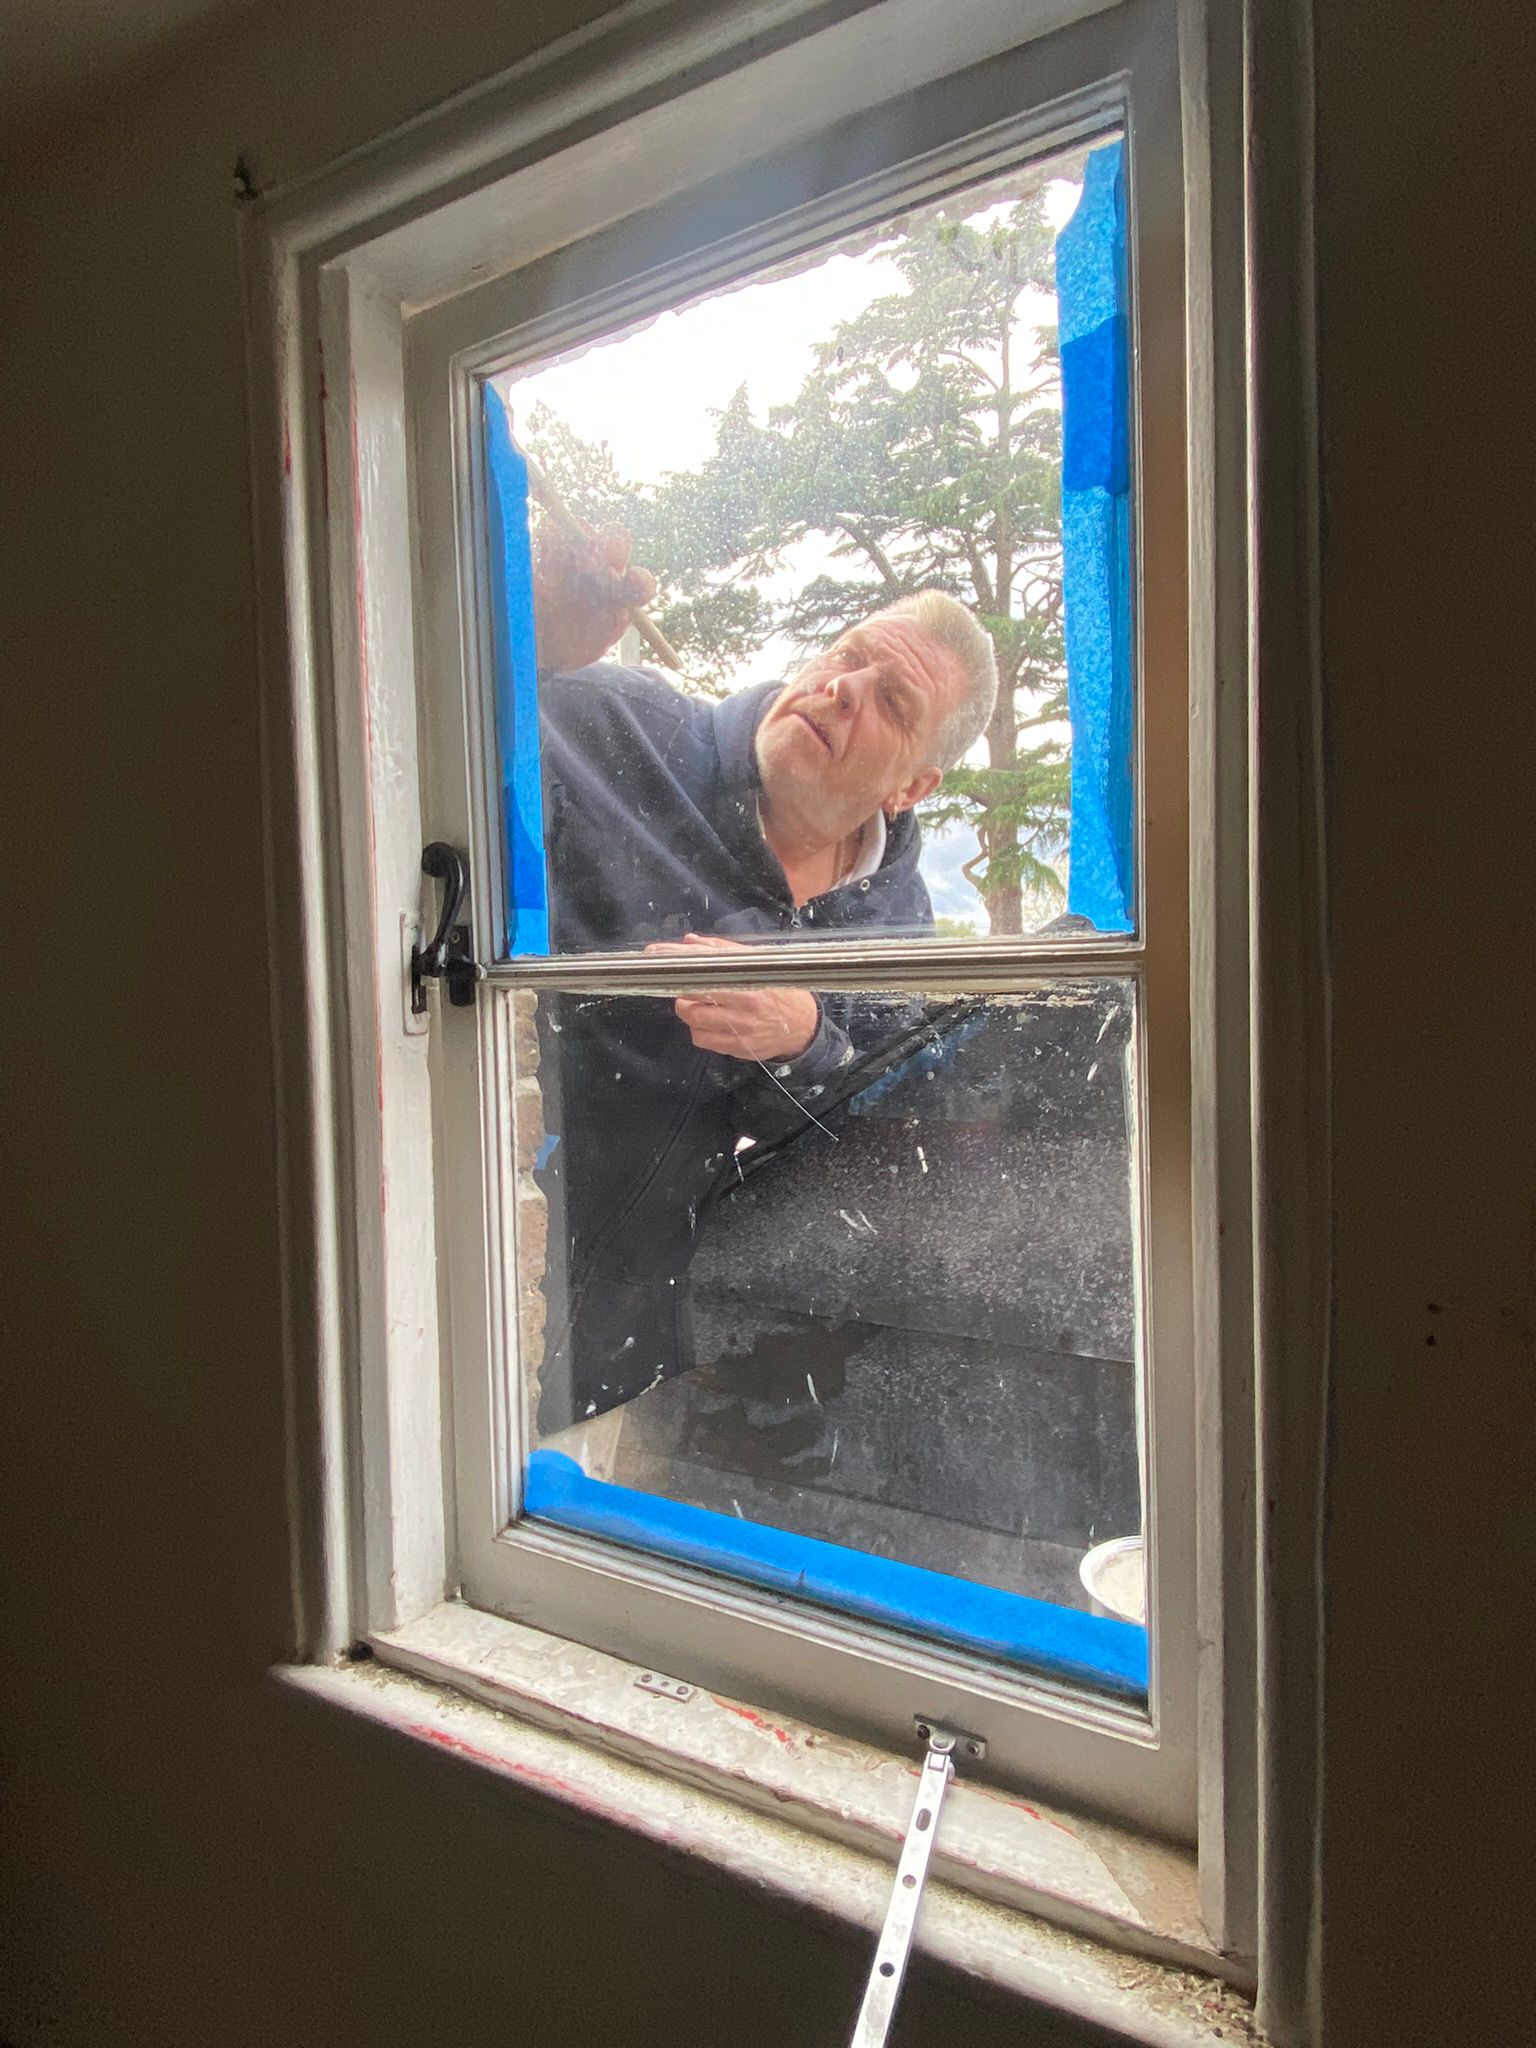 Painting the outside of the window, picture taken from inside.